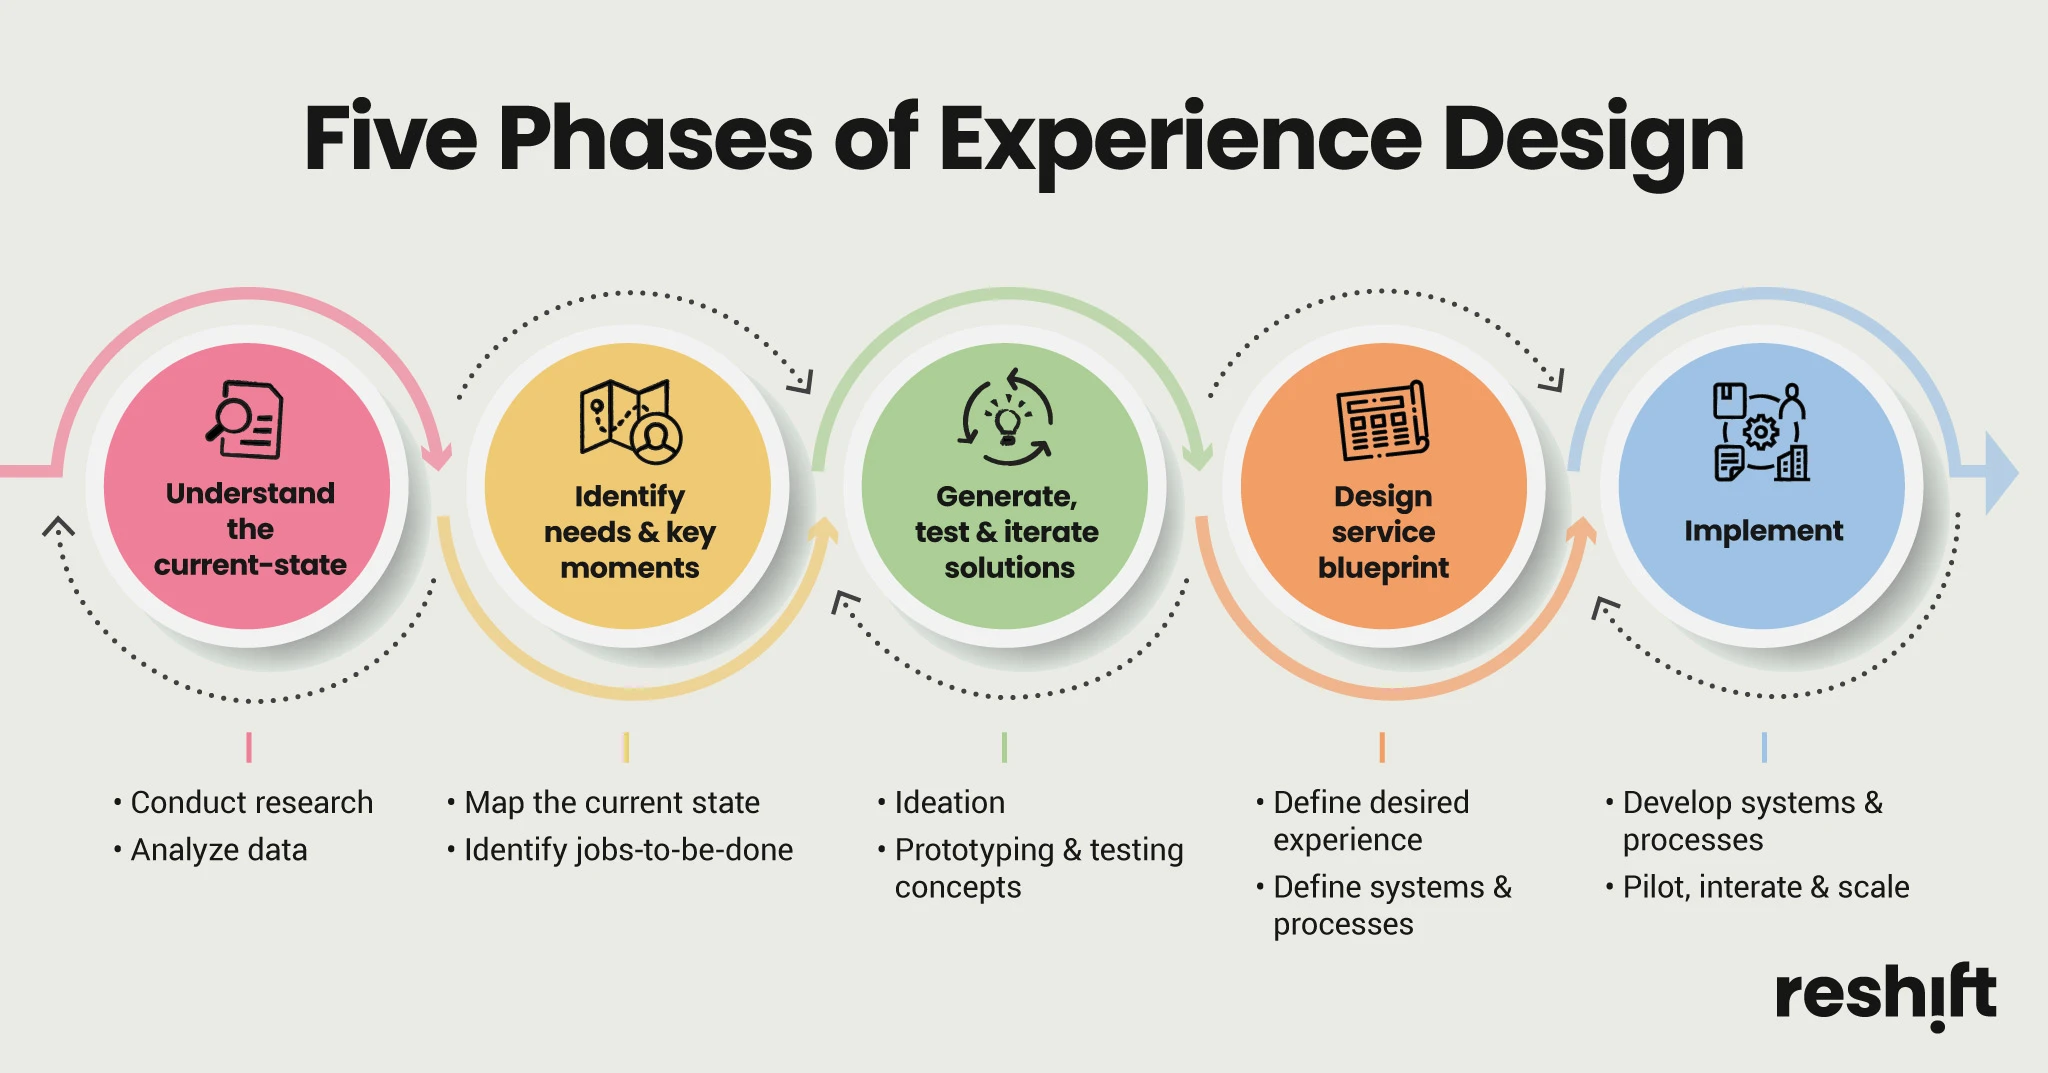 reshift-experience-design-process